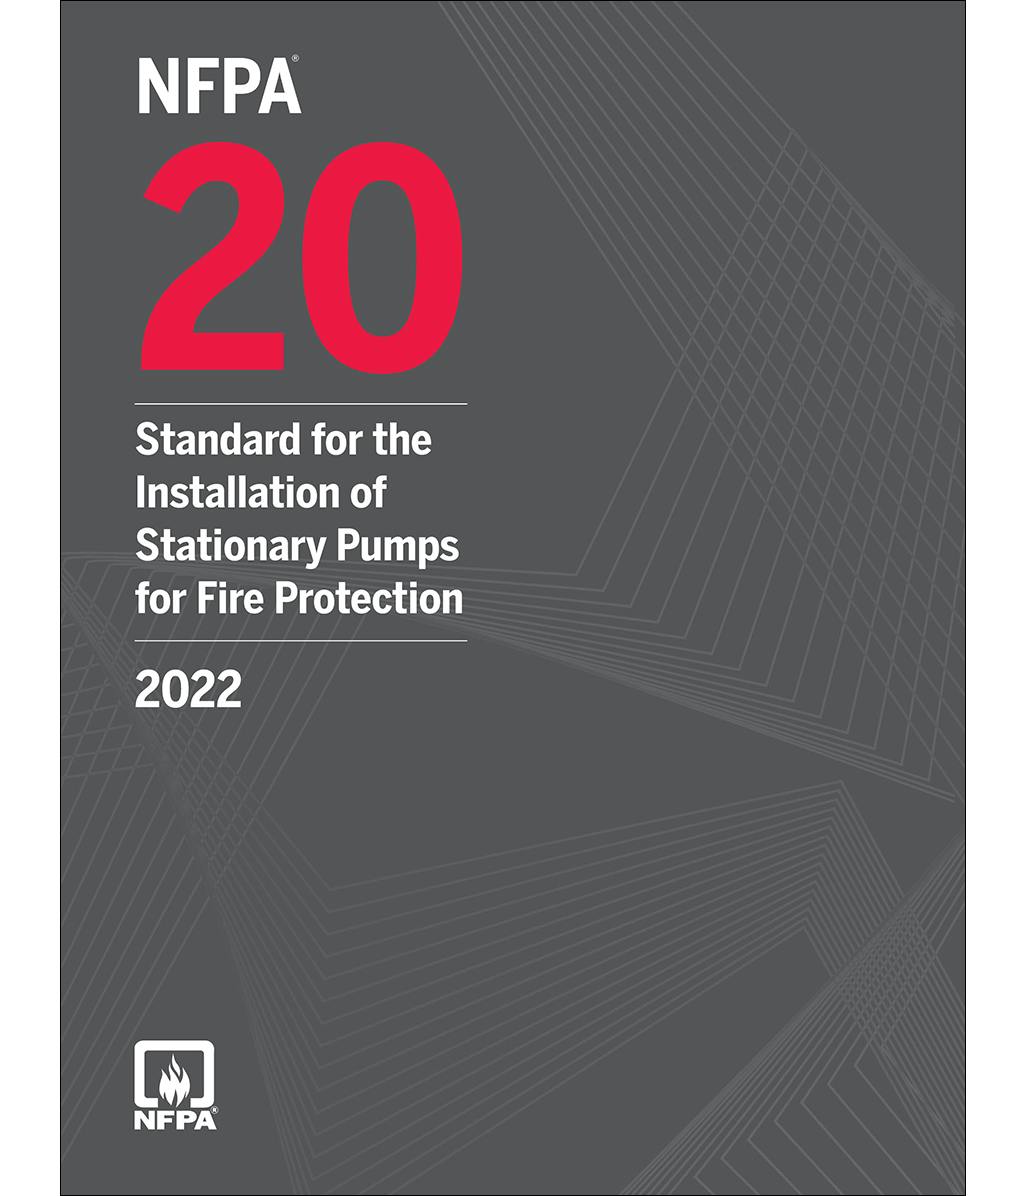 NFPA 20 sets new requirements for fire pumps in high-rise buildings, 2017-05-15